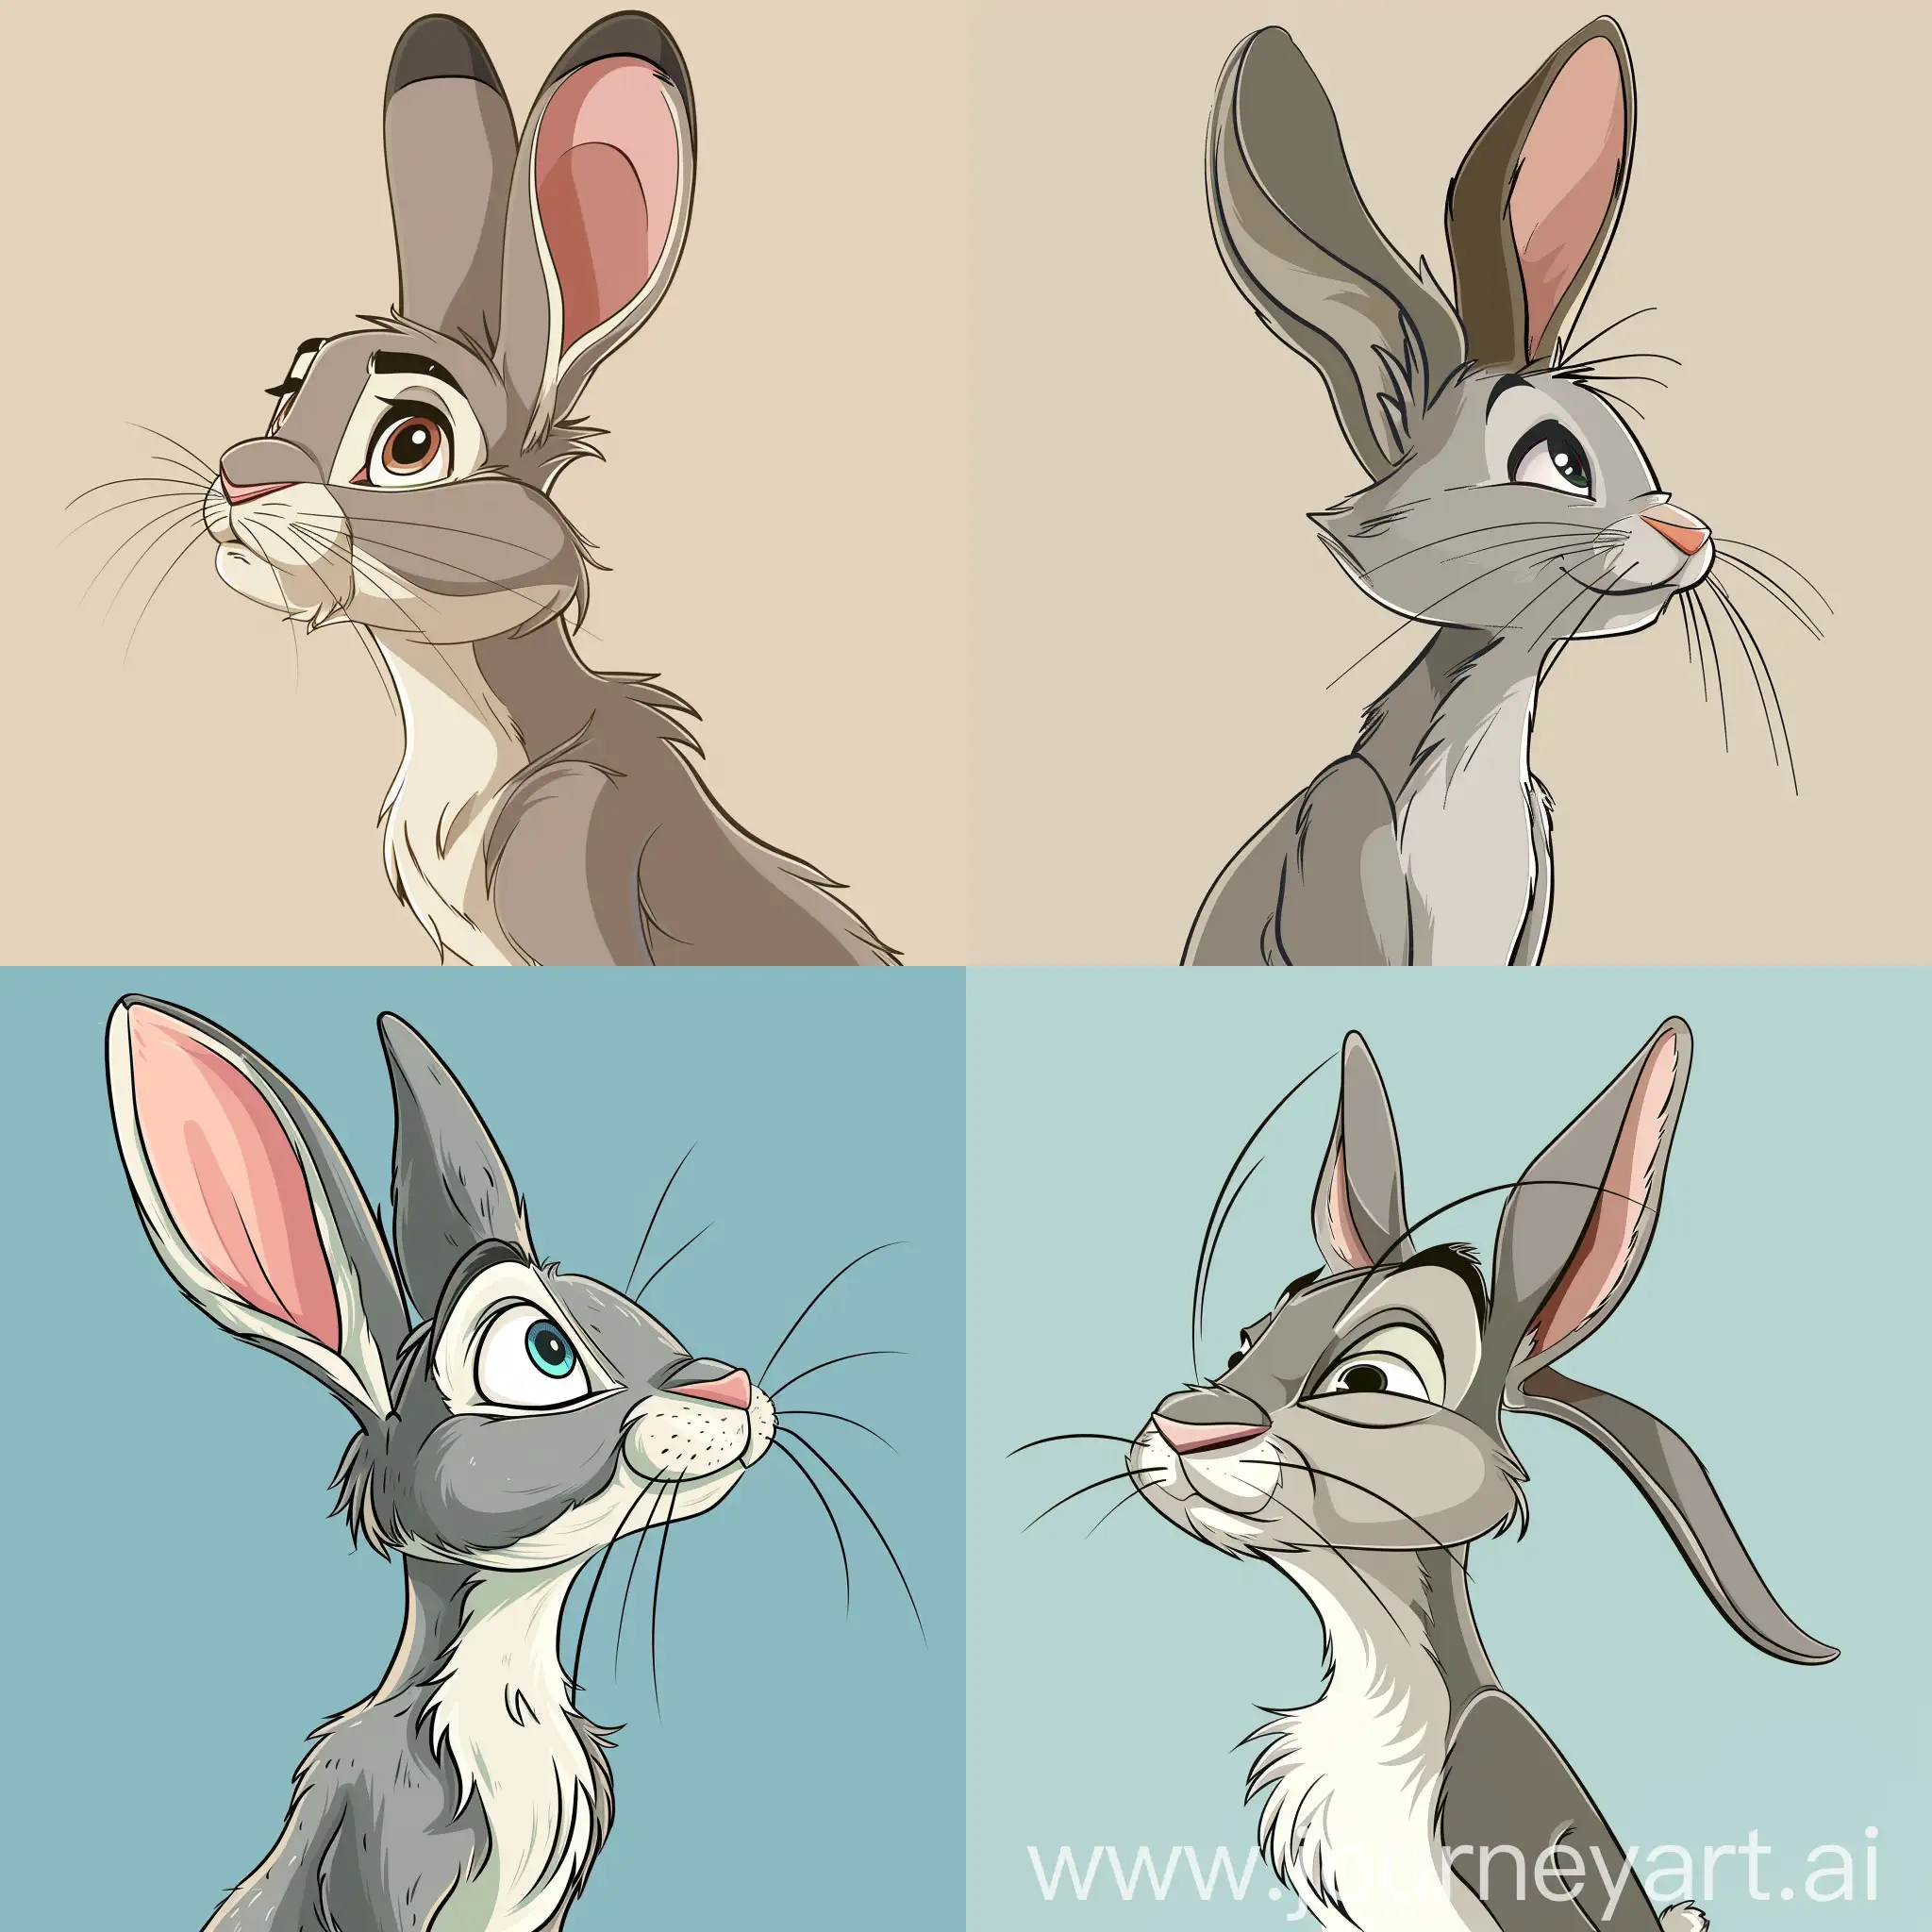 Adorable-Cartoon-Rabbit-with-Drooping-Ears